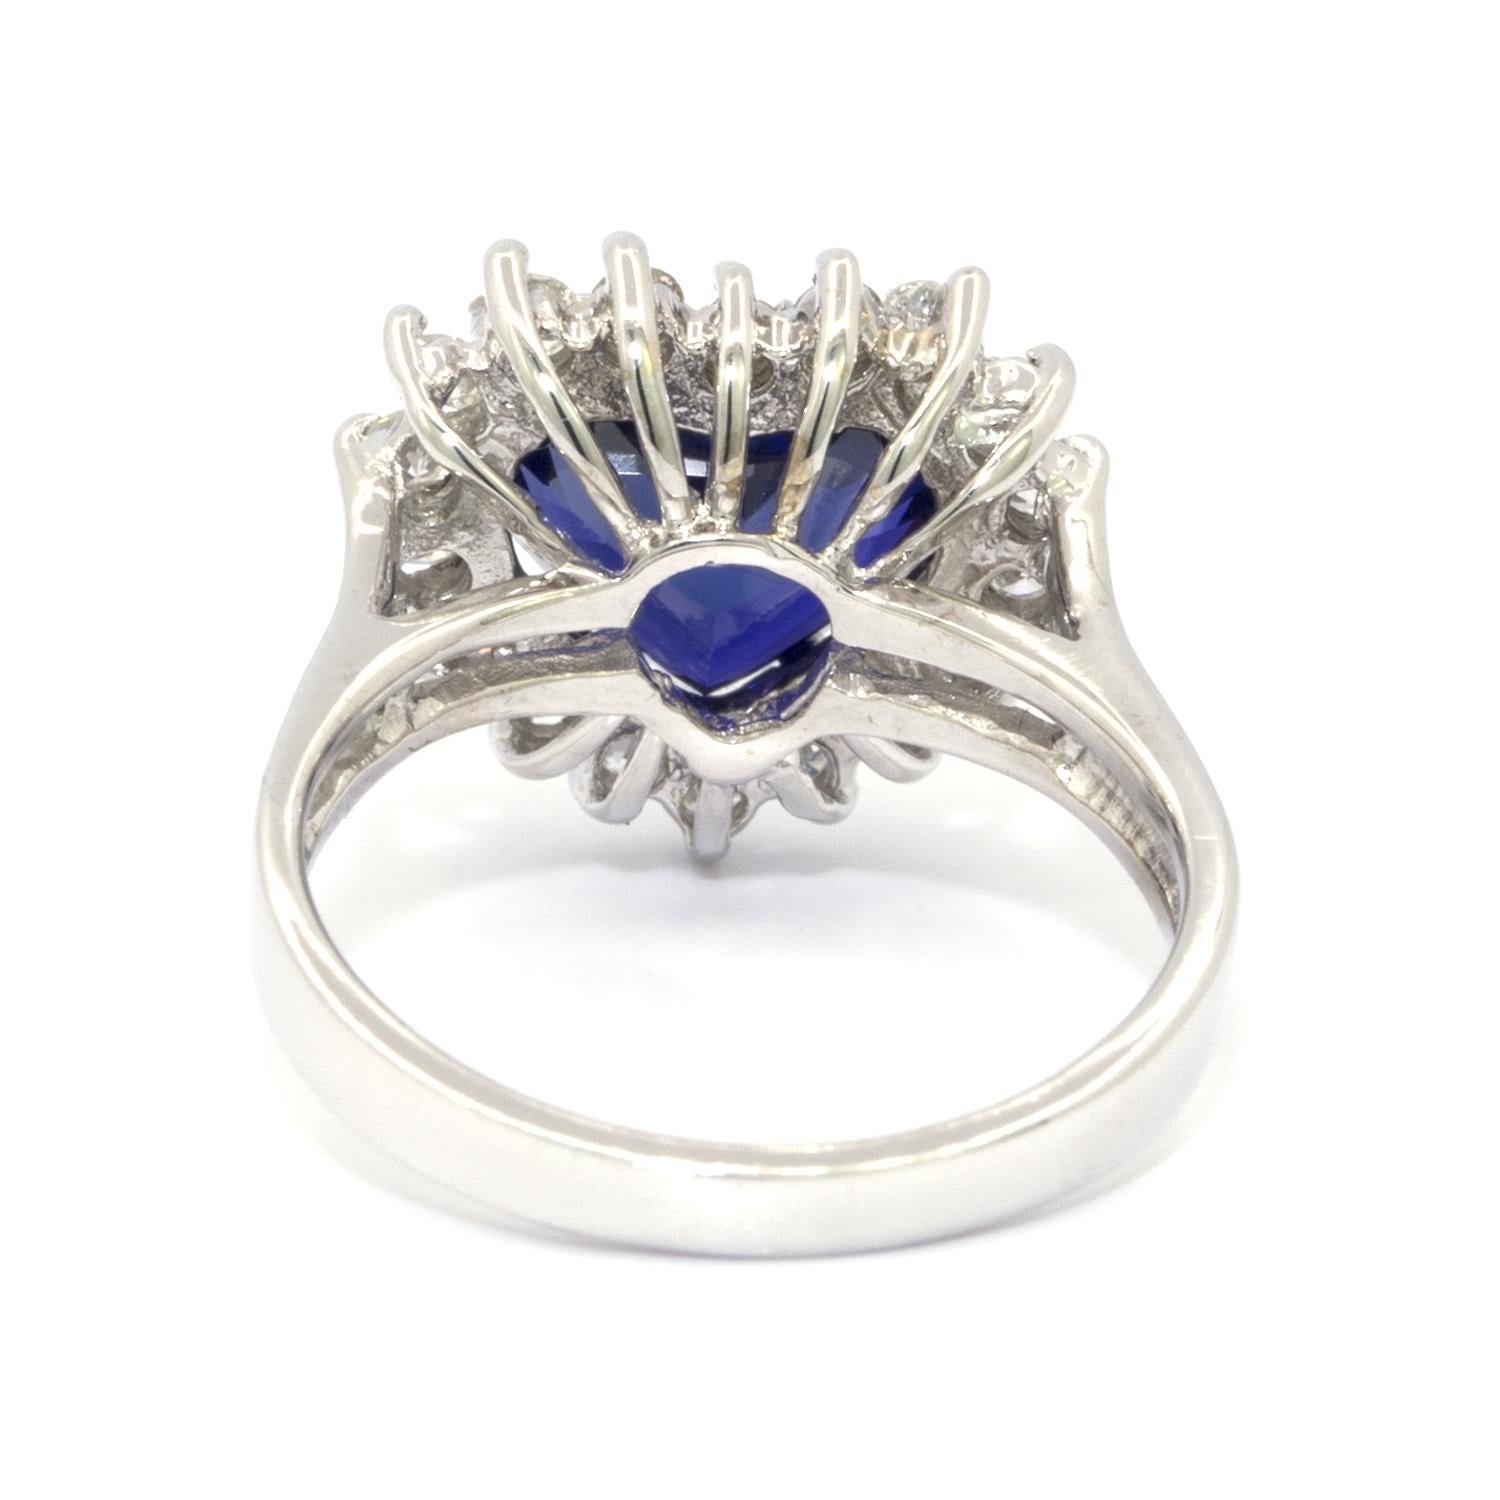 This Heart Shaped Sapphire and Diamond white gold Ring features a 3.87ct, rich blue, heart shaped natural sapphire that is surrounded by 18 rbc clean white prong set diamonds. The round white diamonds make the beautiful rich blue sapphire stand out